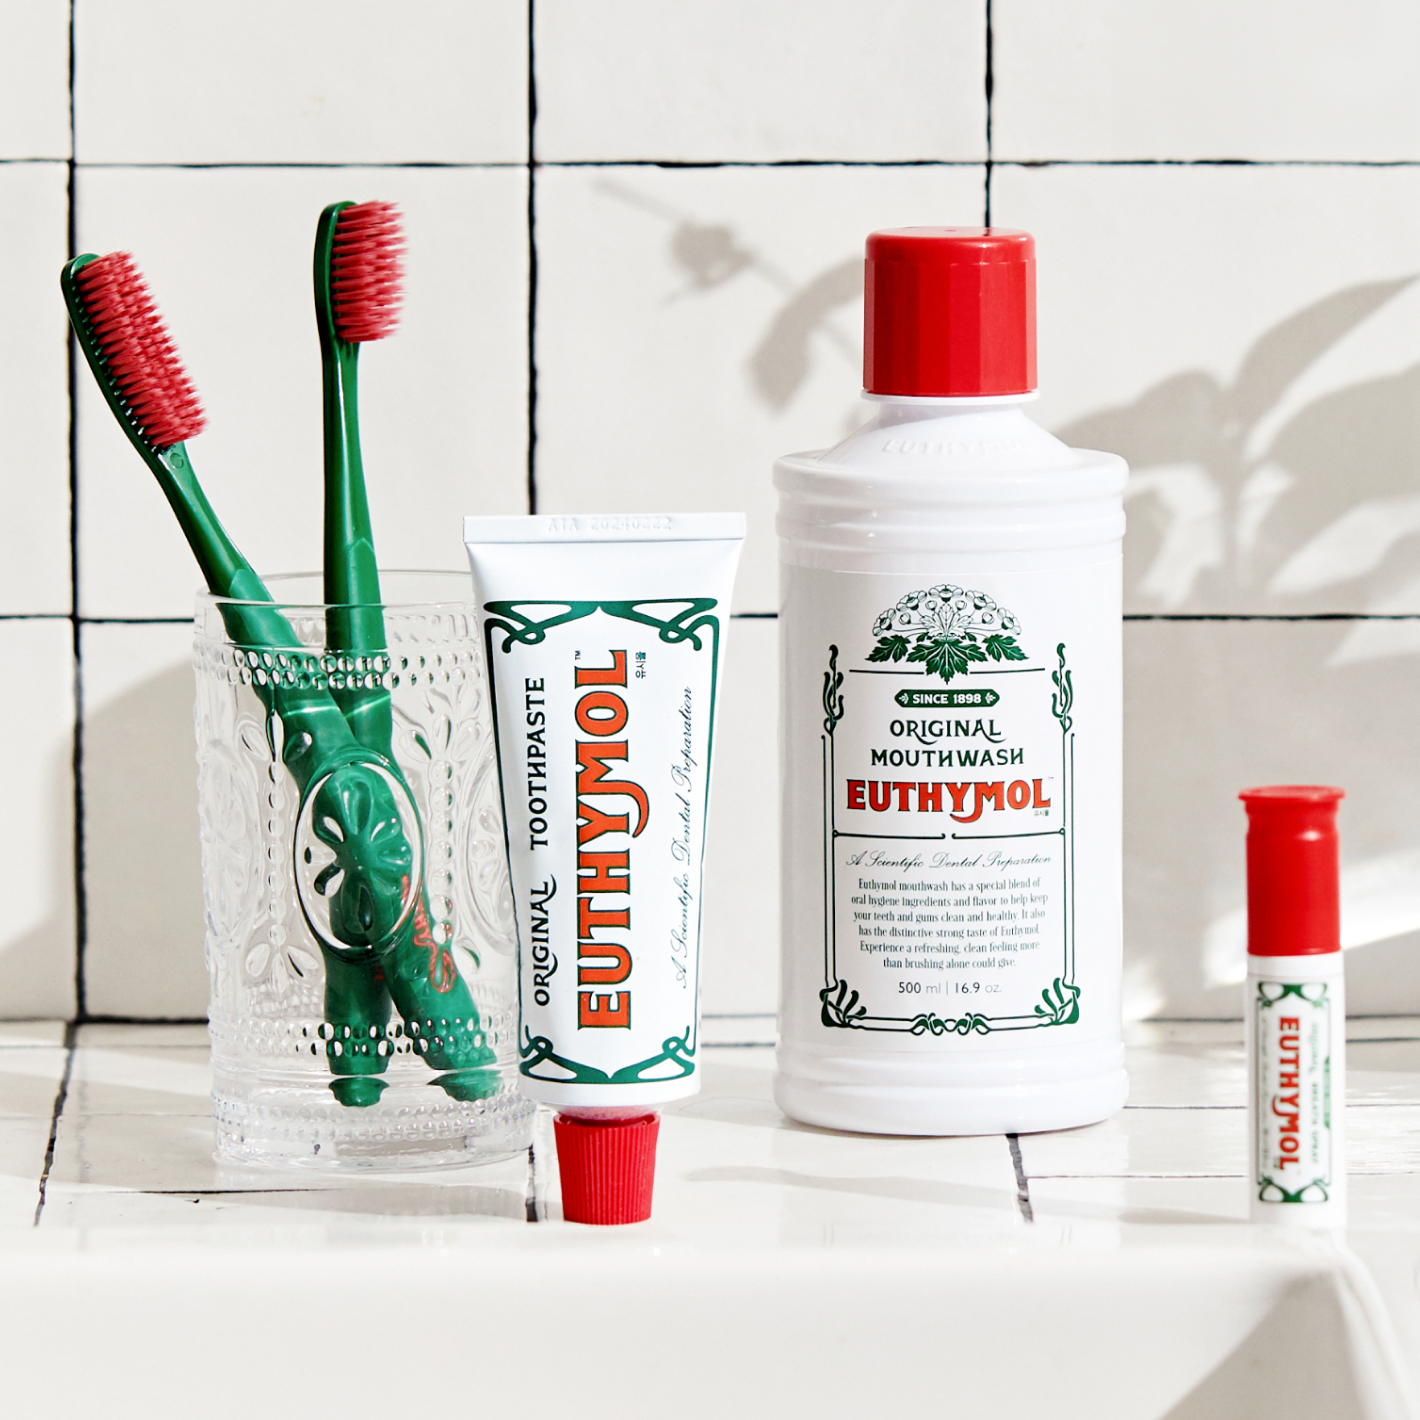 Euthymol Original Toothbrushes,, a tube of toothpaste, and a bottle of mouthwash arranged on a tiled bathroom counter.